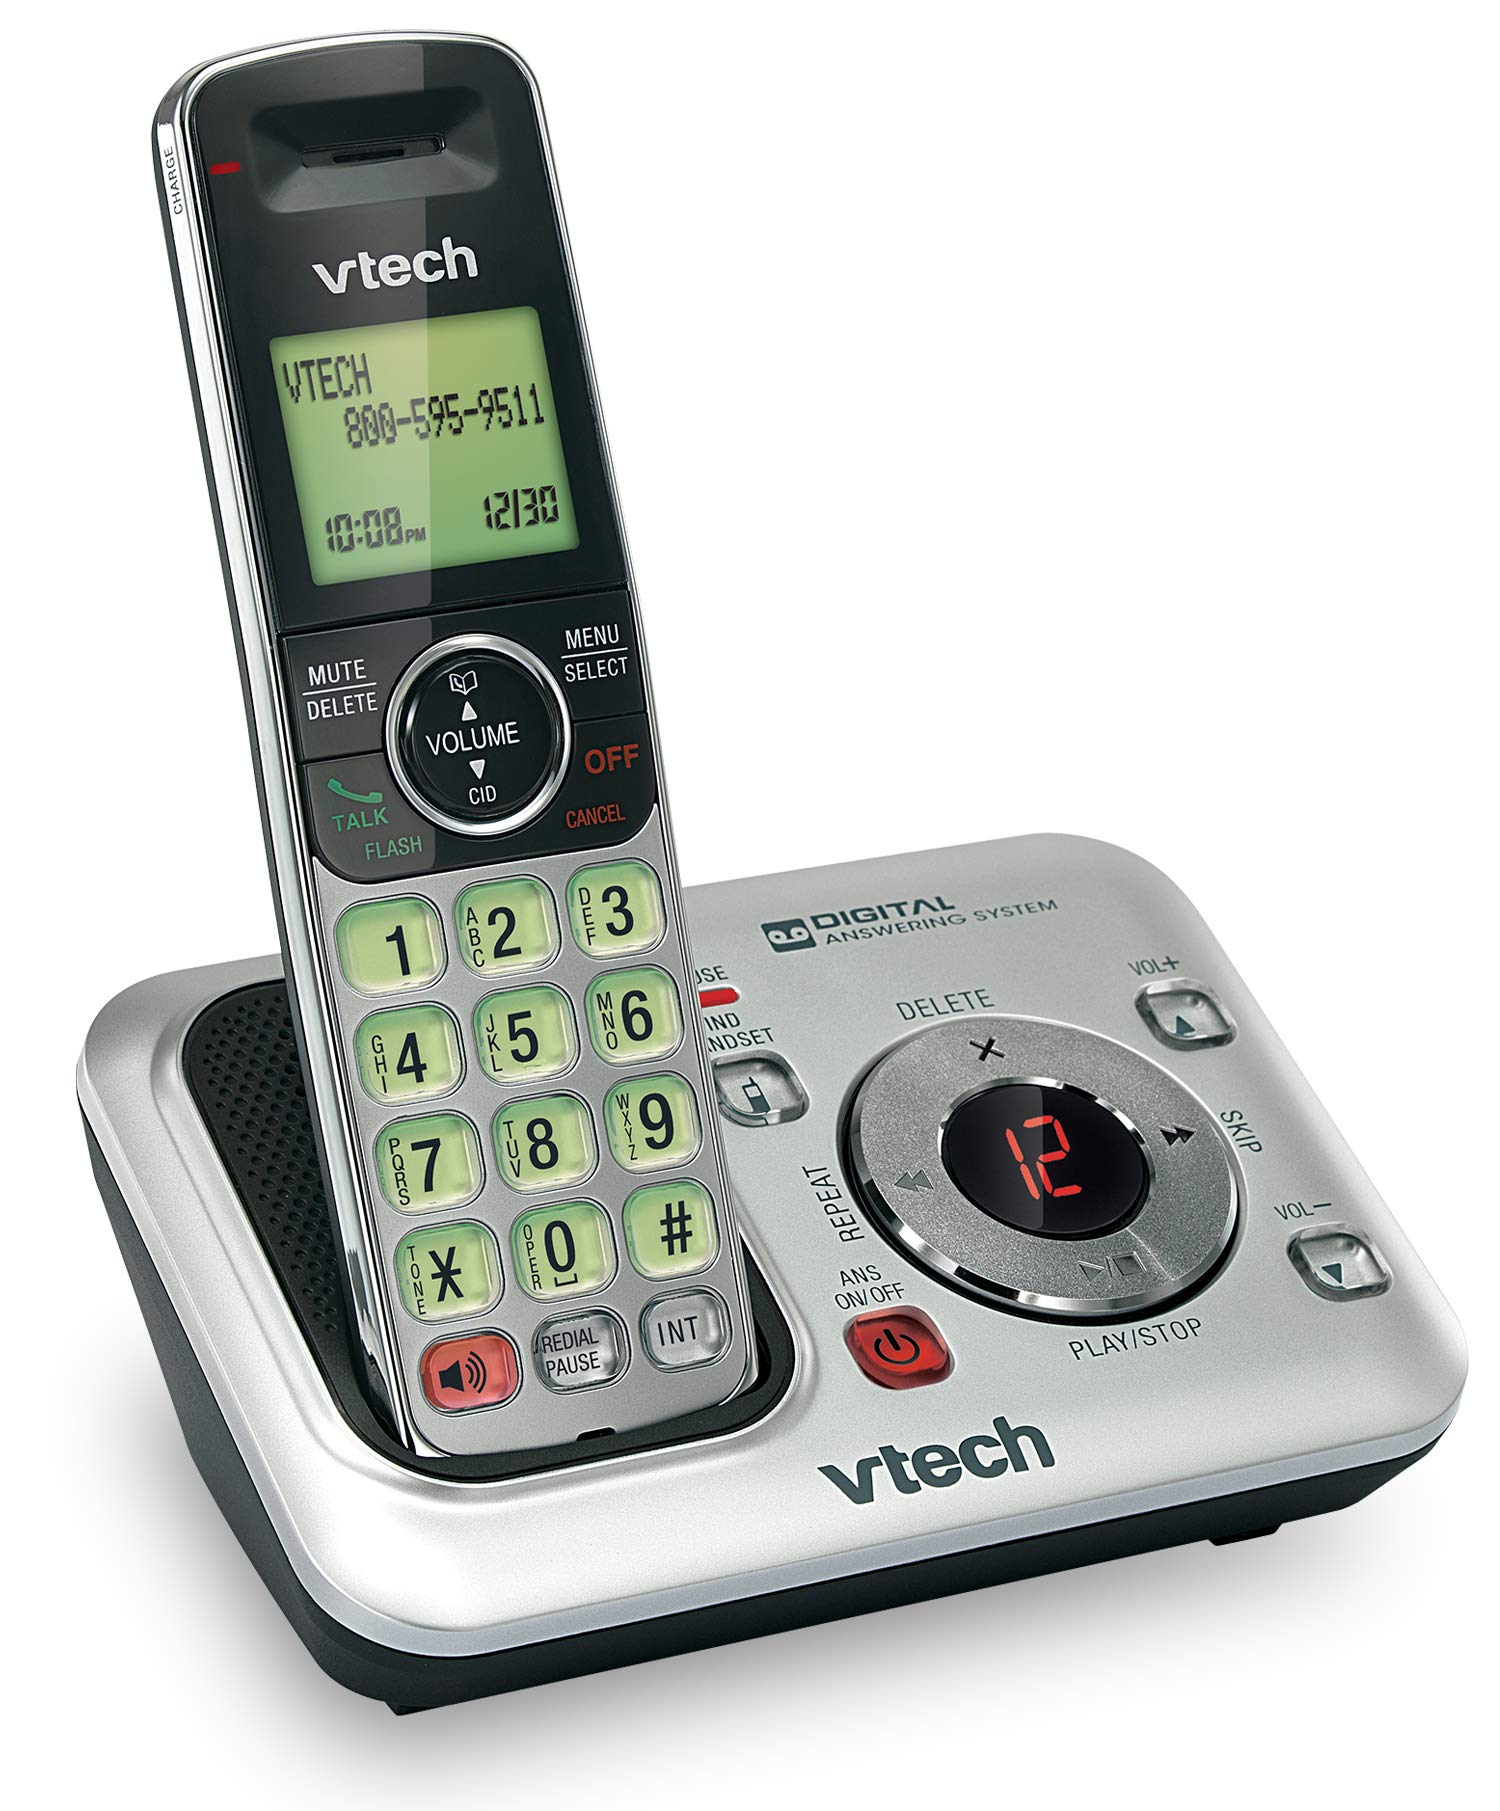 VTech 3-Handset DECT 6.0 Cordless Phone with Answering System and Caller ID, Expandable up to 5 Handsets, Wall-Mountable - image 2 of 3